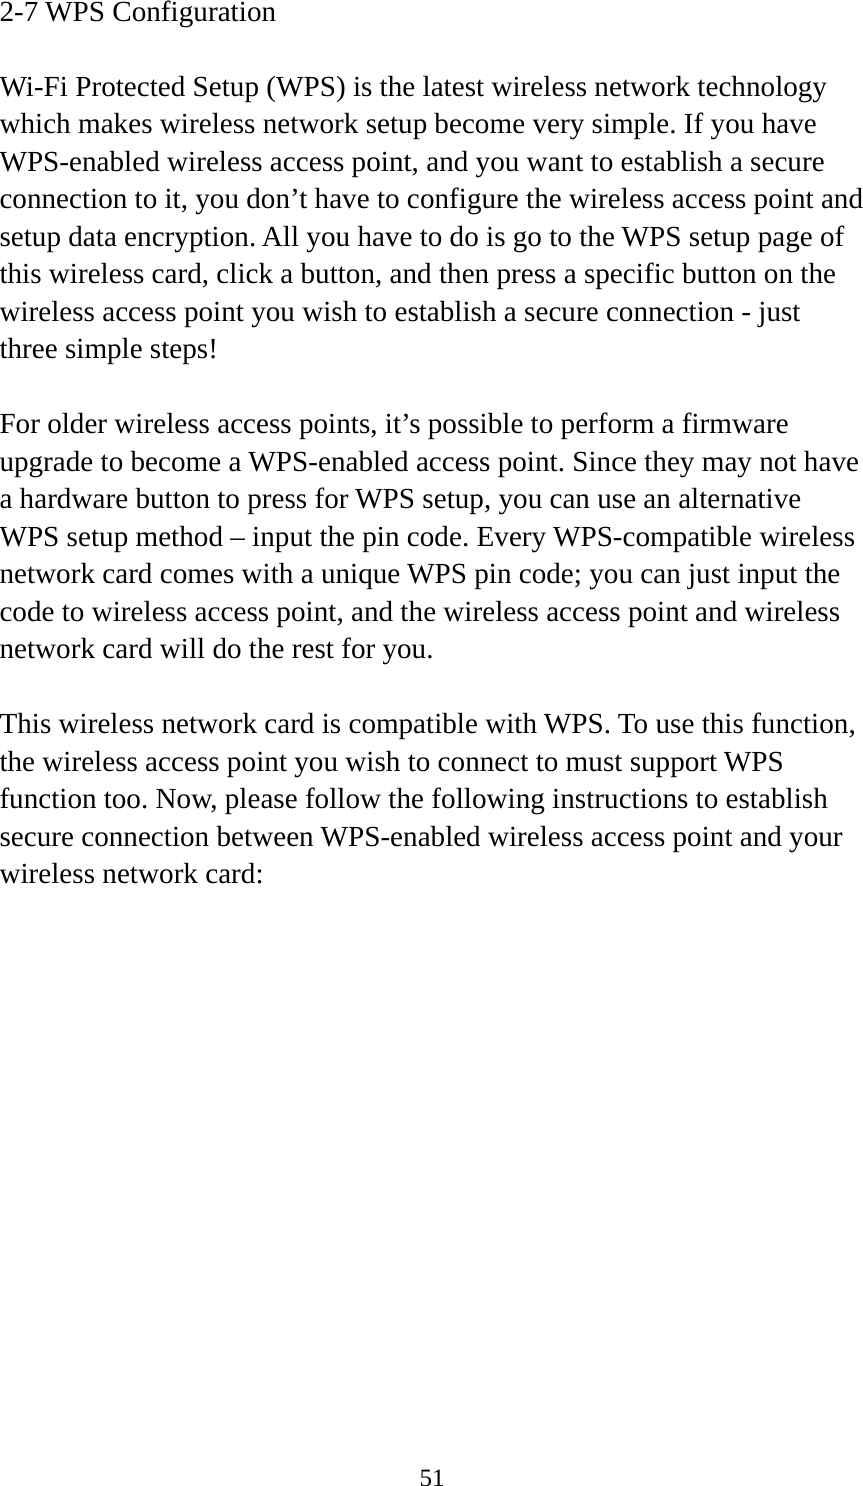  512-7 WPS Configuration  Wi-Fi Protected Setup (WPS) is the latest wireless network technology which makes wireless network setup become very simple. If you have WPS-enabled wireless access point, and you want to establish a secure connection to it, you don’t have to configure the wireless access point and setup data encryption. All you have to do is go to the WPS setup page of this wireless card, click a button, and then press a specific button on the wireless access point you wish to establish a secure connection - just three simple steps!    For older wireless access points, it’s possible to perform a firmware upgrade to become a WPS-enabled access point. Since they may not have a hardware button to press for WPS setup, you can use an alternative WPS setup method – input the pin code. Every WPS-compatible wireless network card comes with a unique WPS pin code; you can just input the code to wireless access point, and the wireless access point and wireless network card will do the rest for you.  This wireless network card is compatible with WPS. To use this function, the wireless access point you wish to connect to must support WPS function too. Now, please follow the following instructions to establish secure connection between WPS-enabled wireless access point and your wireless network card: 